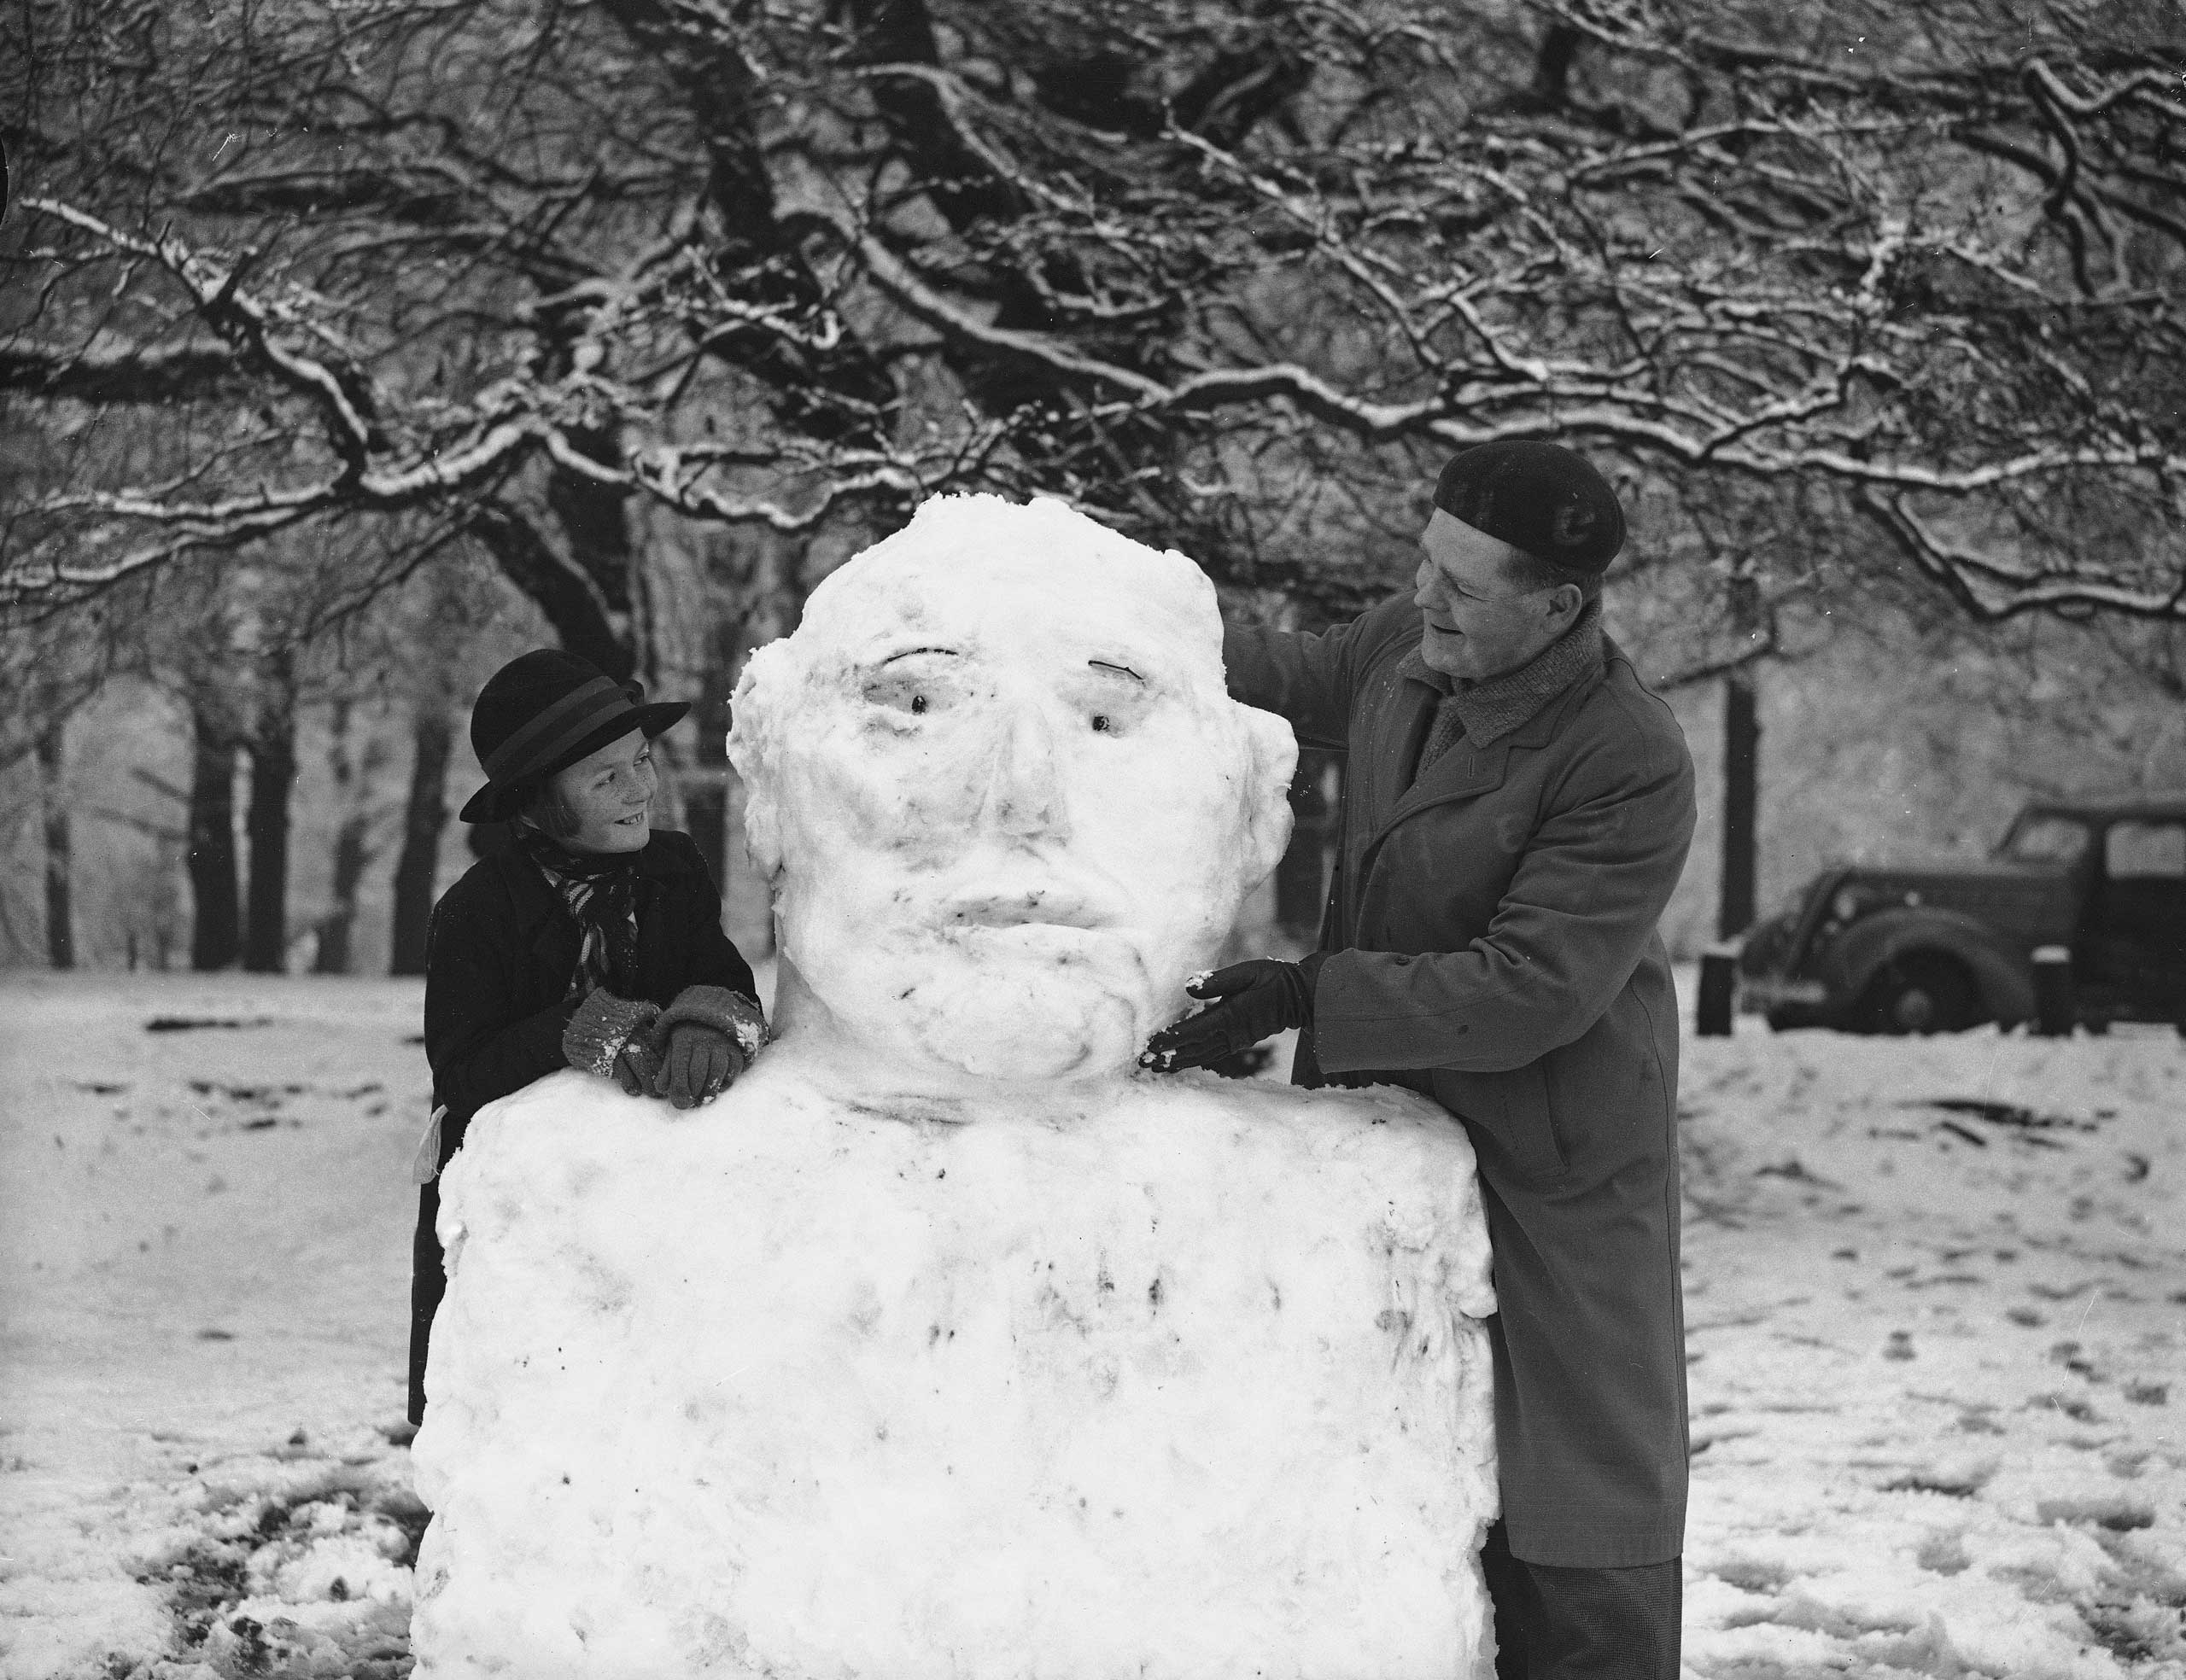 An unusually large snowman on Box Hill in Surrey, England, on Mar. 7, 1937